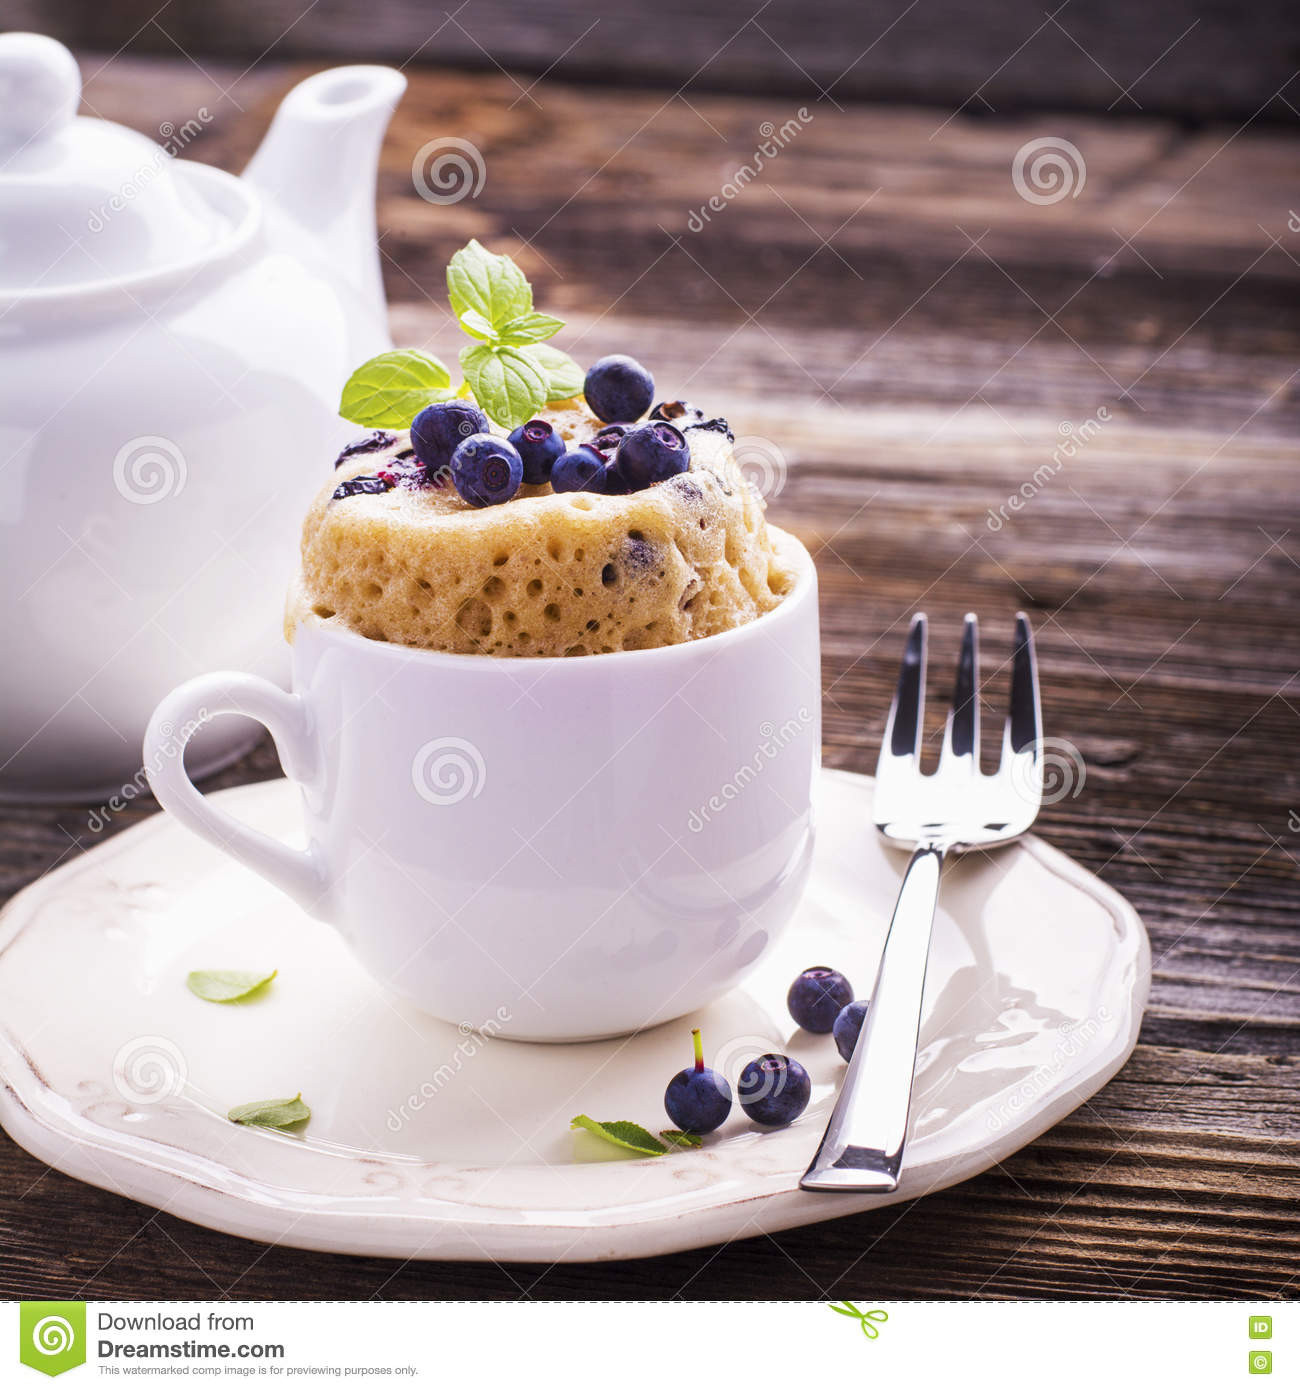 Microwave Cupcakes In A Mug
 Blueberry Microwave Muffin In Mug Selective Focus Stock